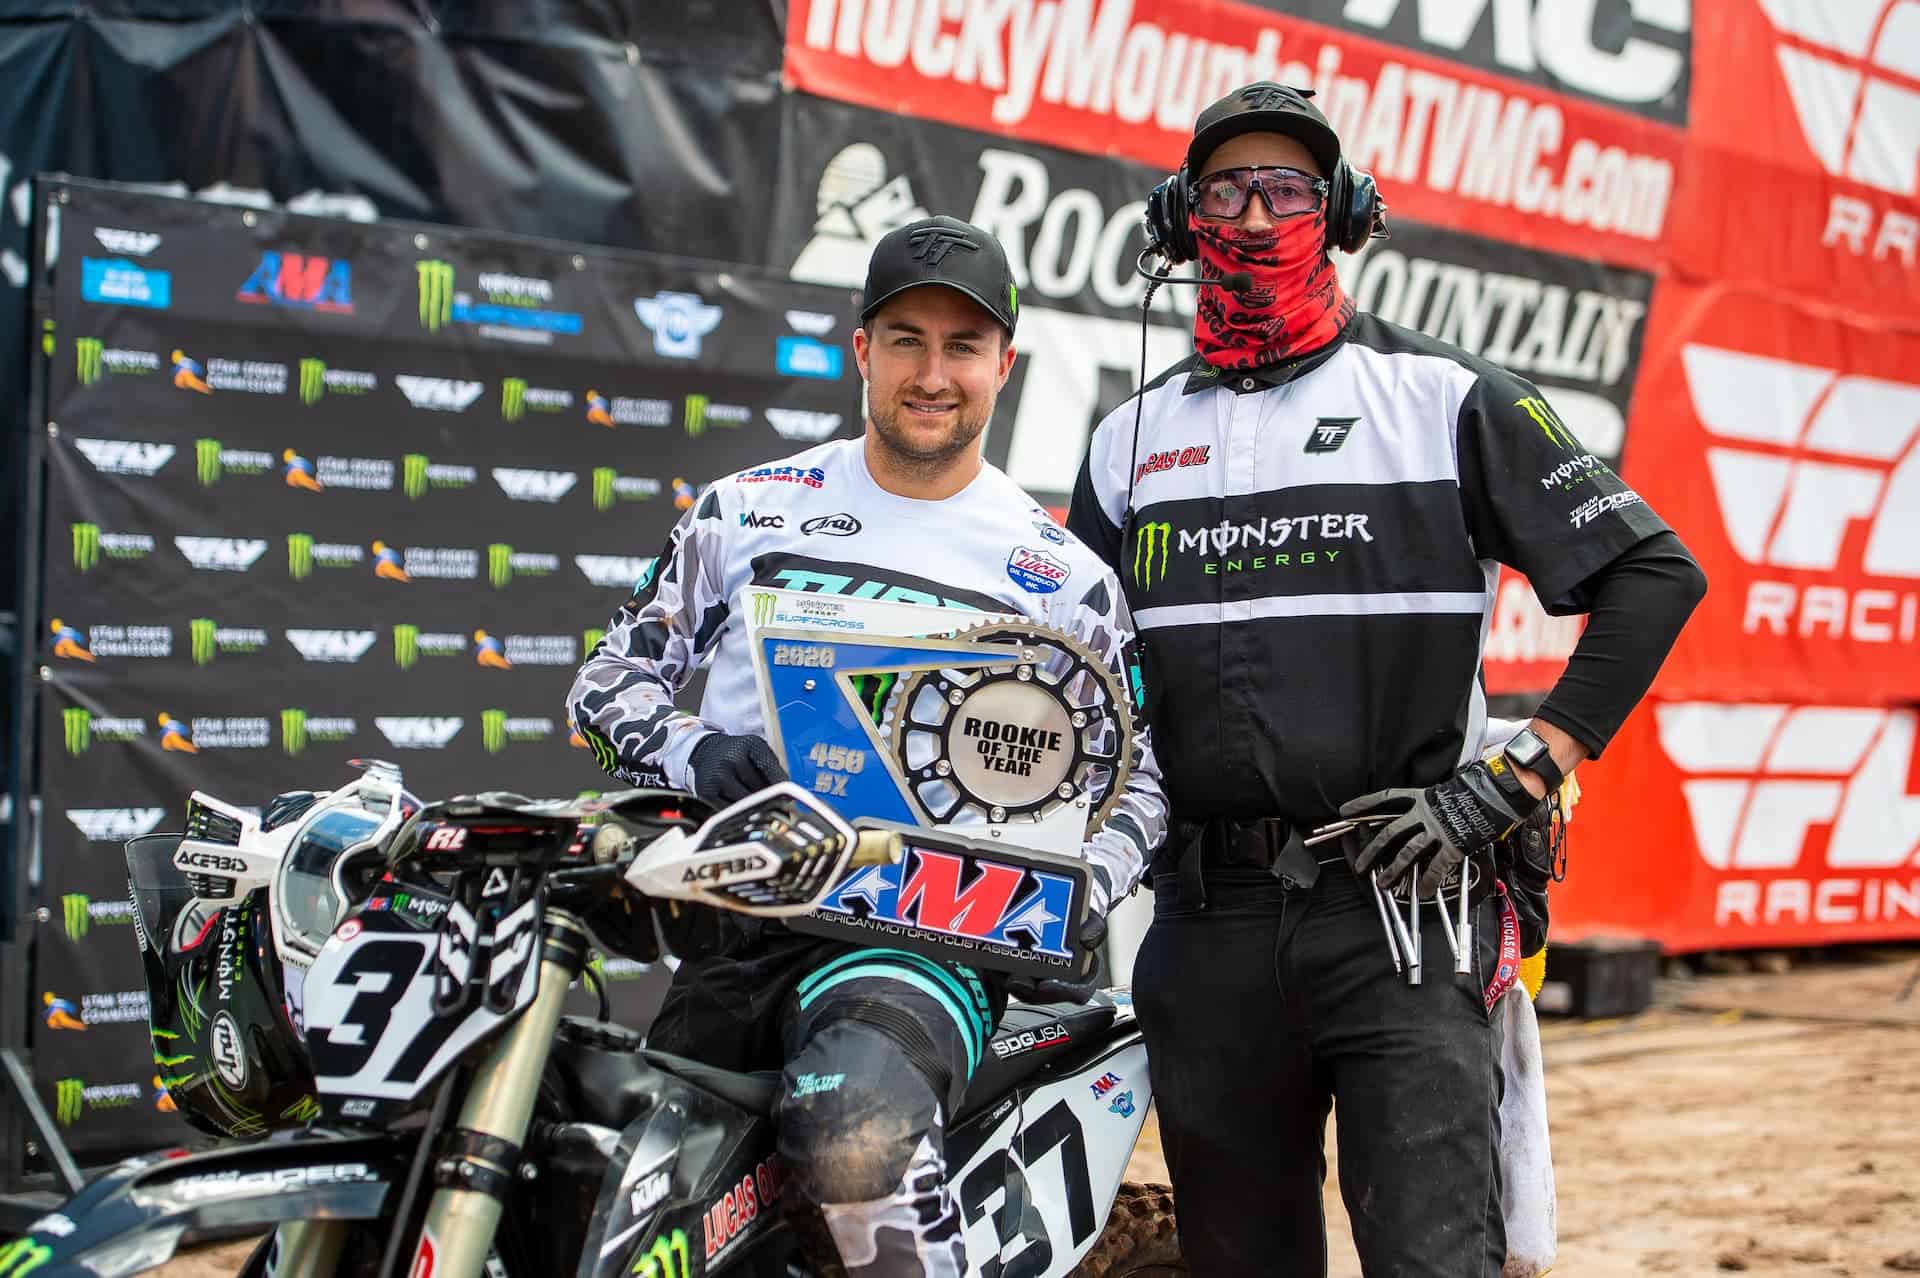 Martin Davalos Came from Ecuador to Chase Racing at the Highest Level